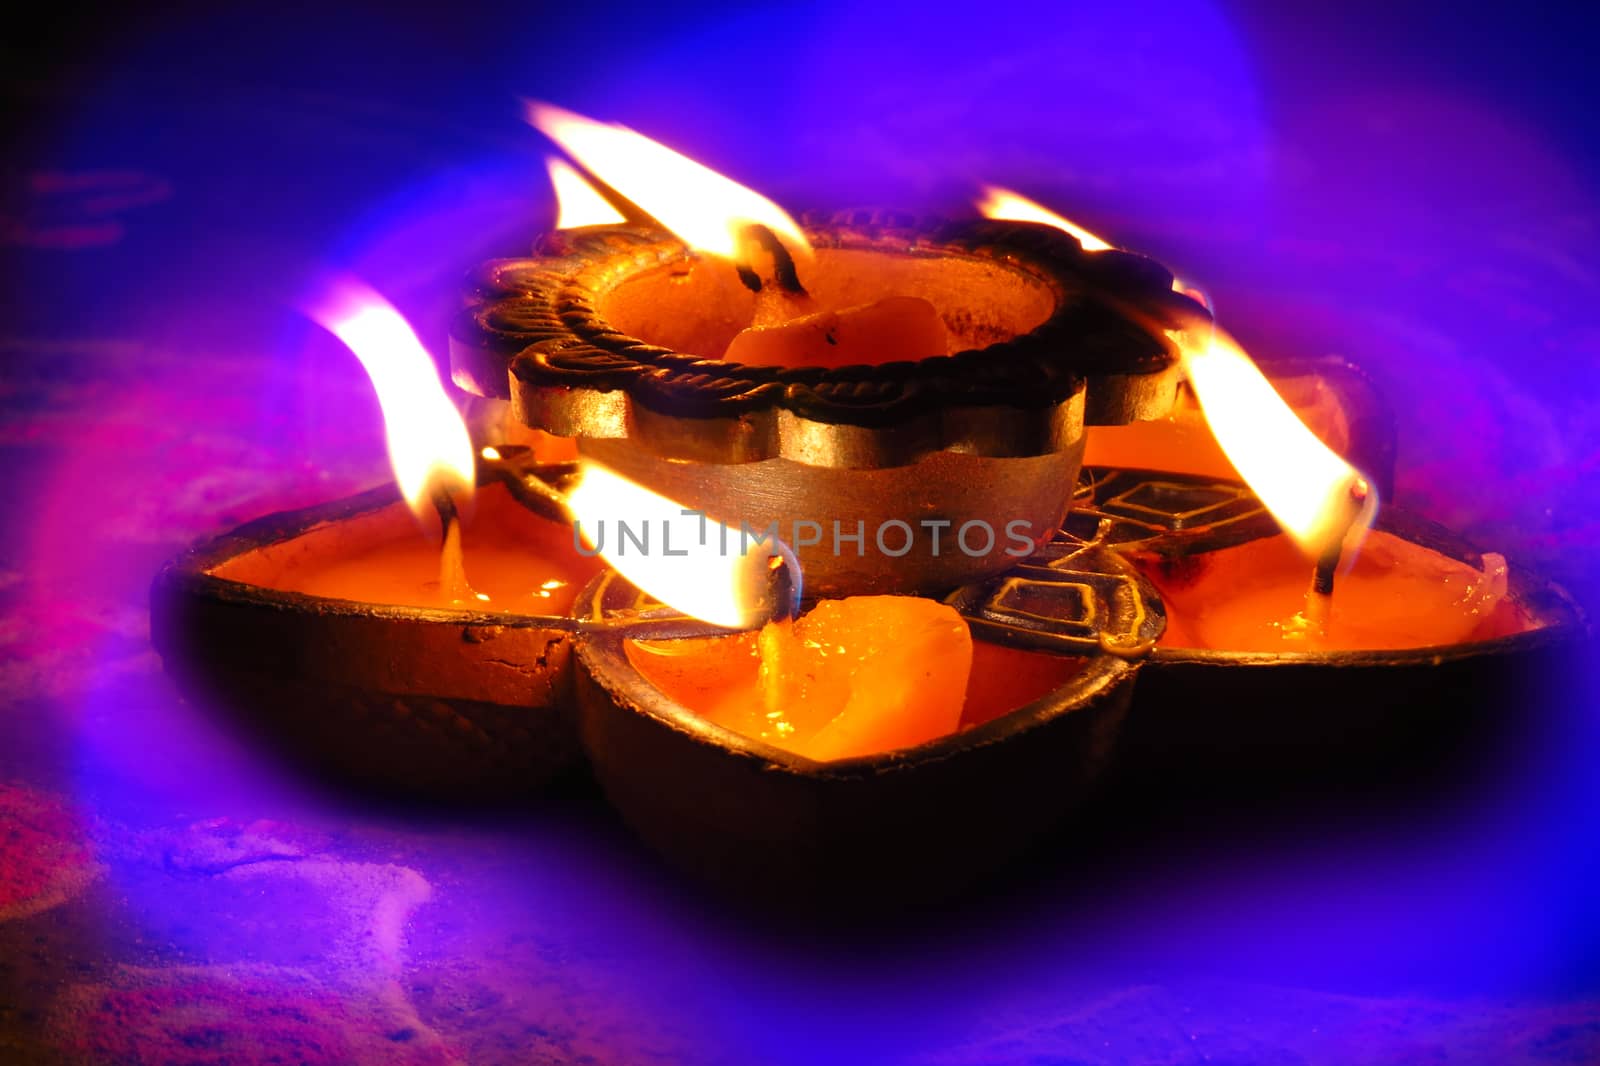 Traditional ritual lamps lit up on the occassion of Diwali festival in India                               